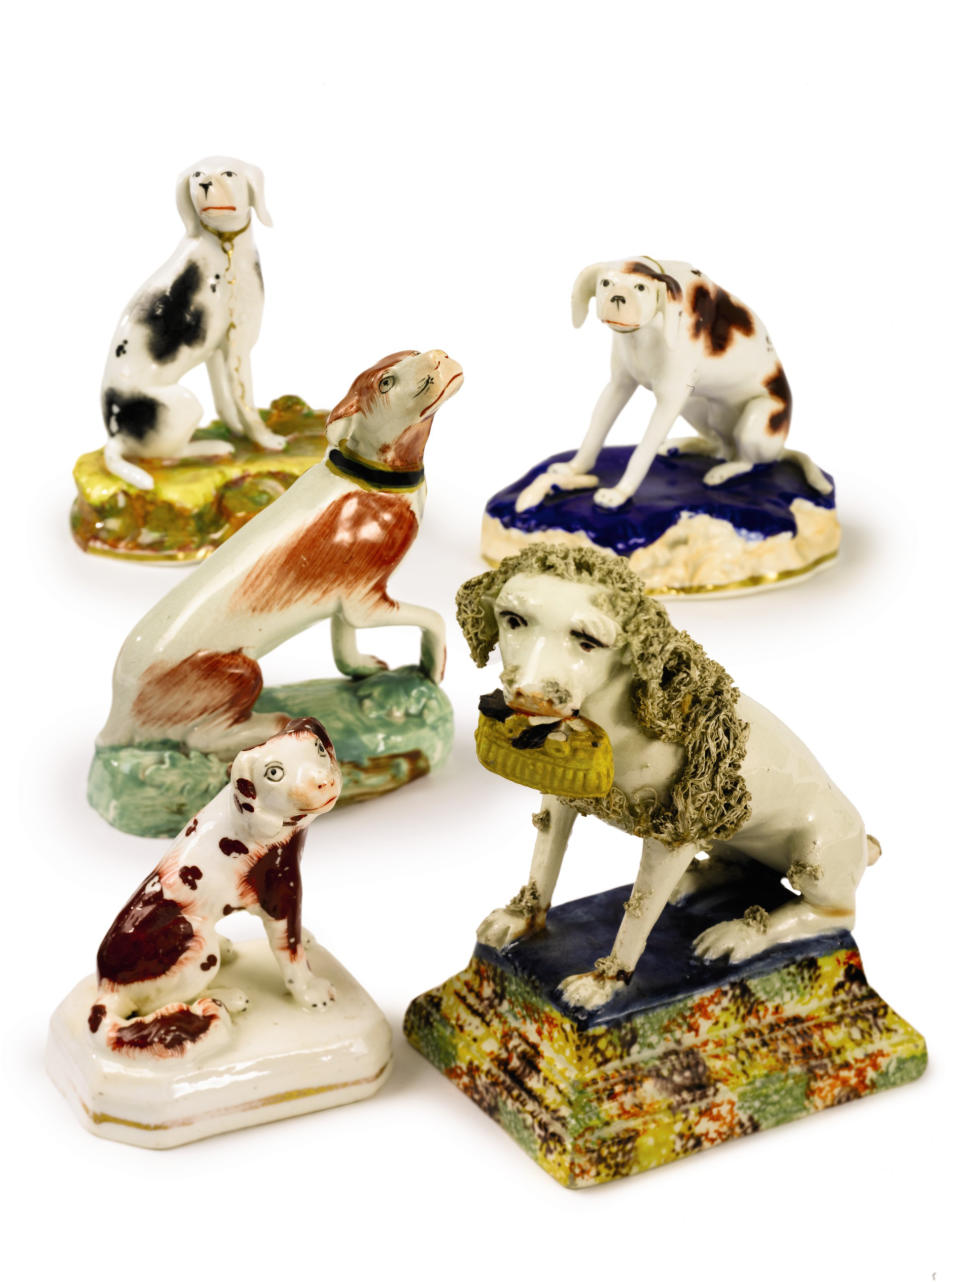 This undated photo provided by Sotheby's shows a group of five seated porcelain dogs that belonged to the late philanthropist Brooke Astor. Sotheby's said the lot will be offered for sale Sept. 24-25, 2012 with some 900 of Astor's personal items from her Park Avenue duplex and her stone manor in Westchester. (AP Photo/Sotheby's)